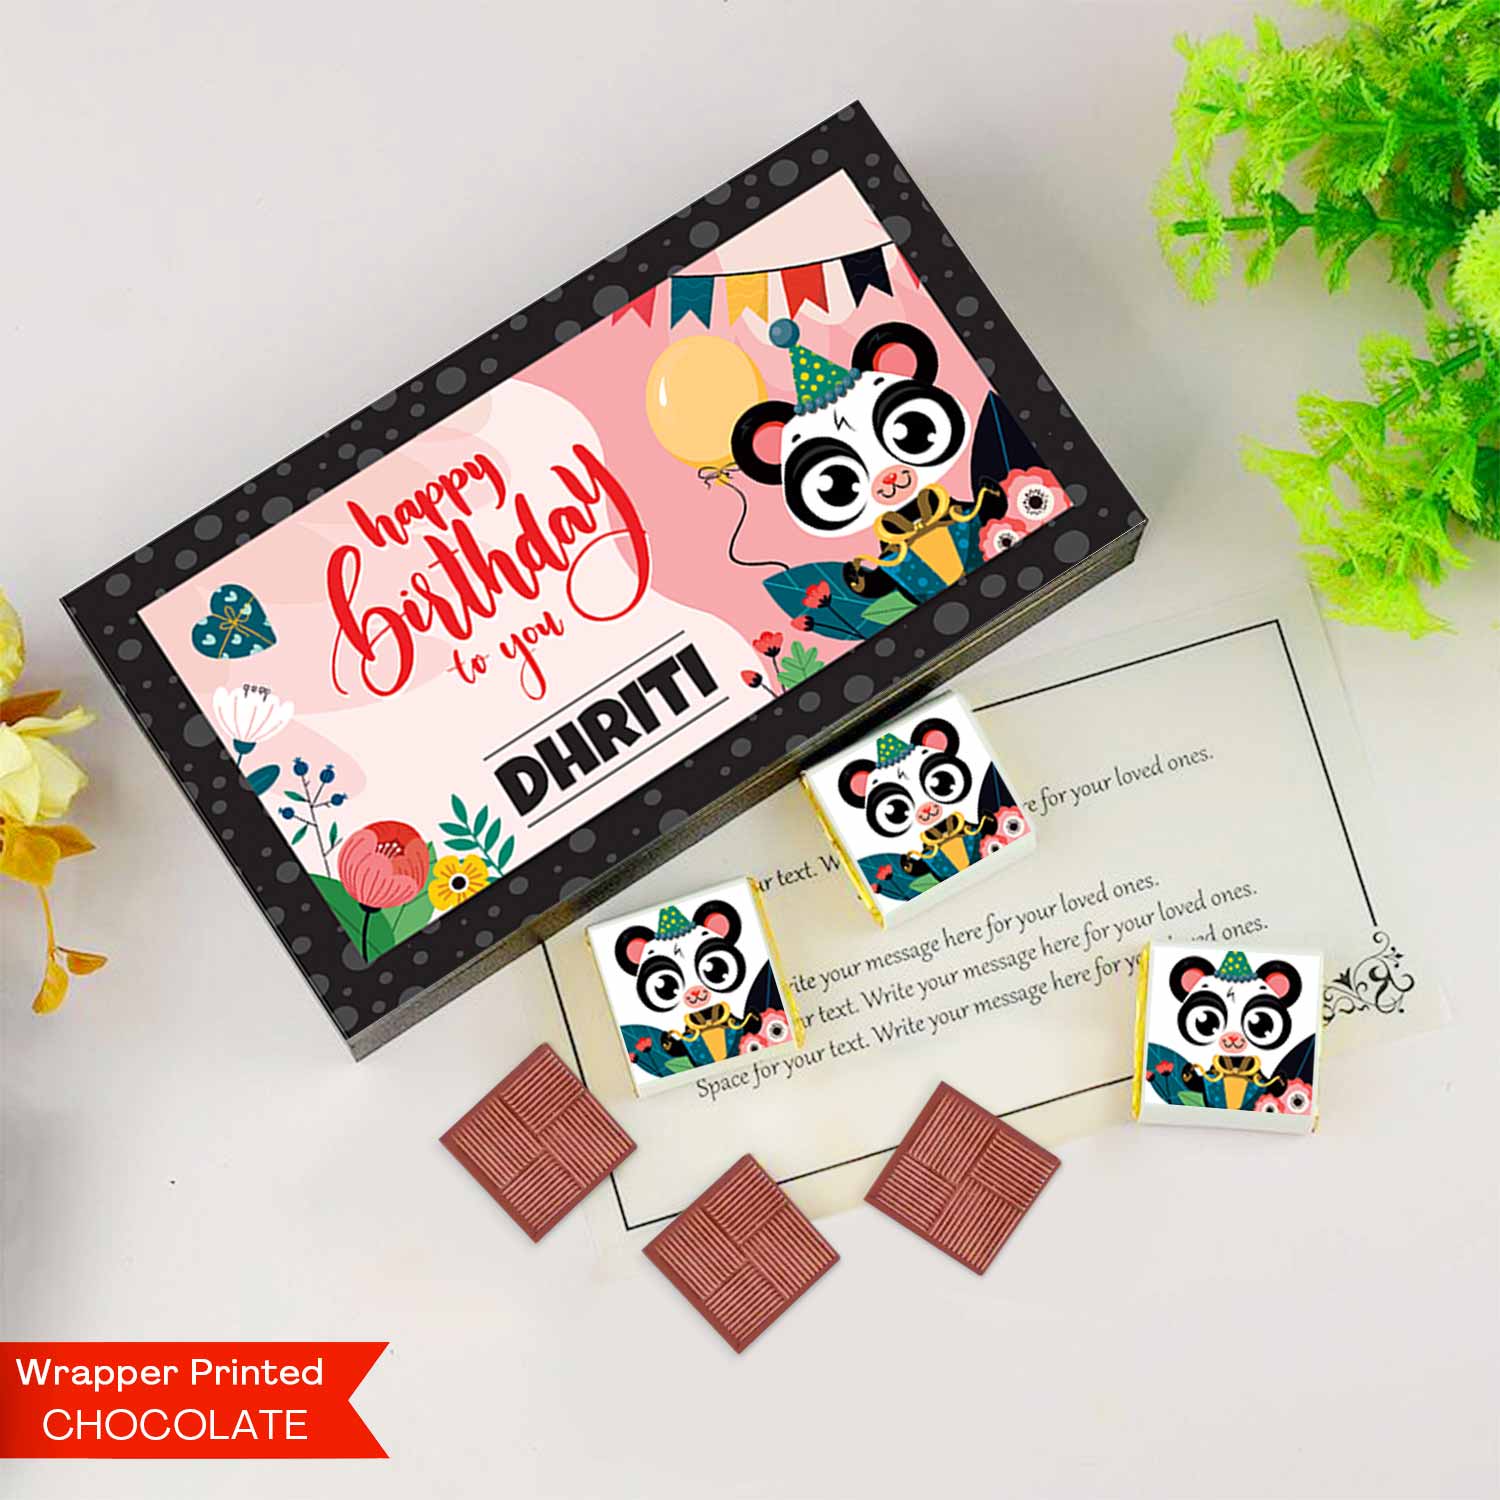 unique personalised gifts india best website for personalized gifts best websites for personalized gifts in india customised gifts for him customised gift shops near me customised gifts for birthday customized gifts for couples india's customised gifts instagram